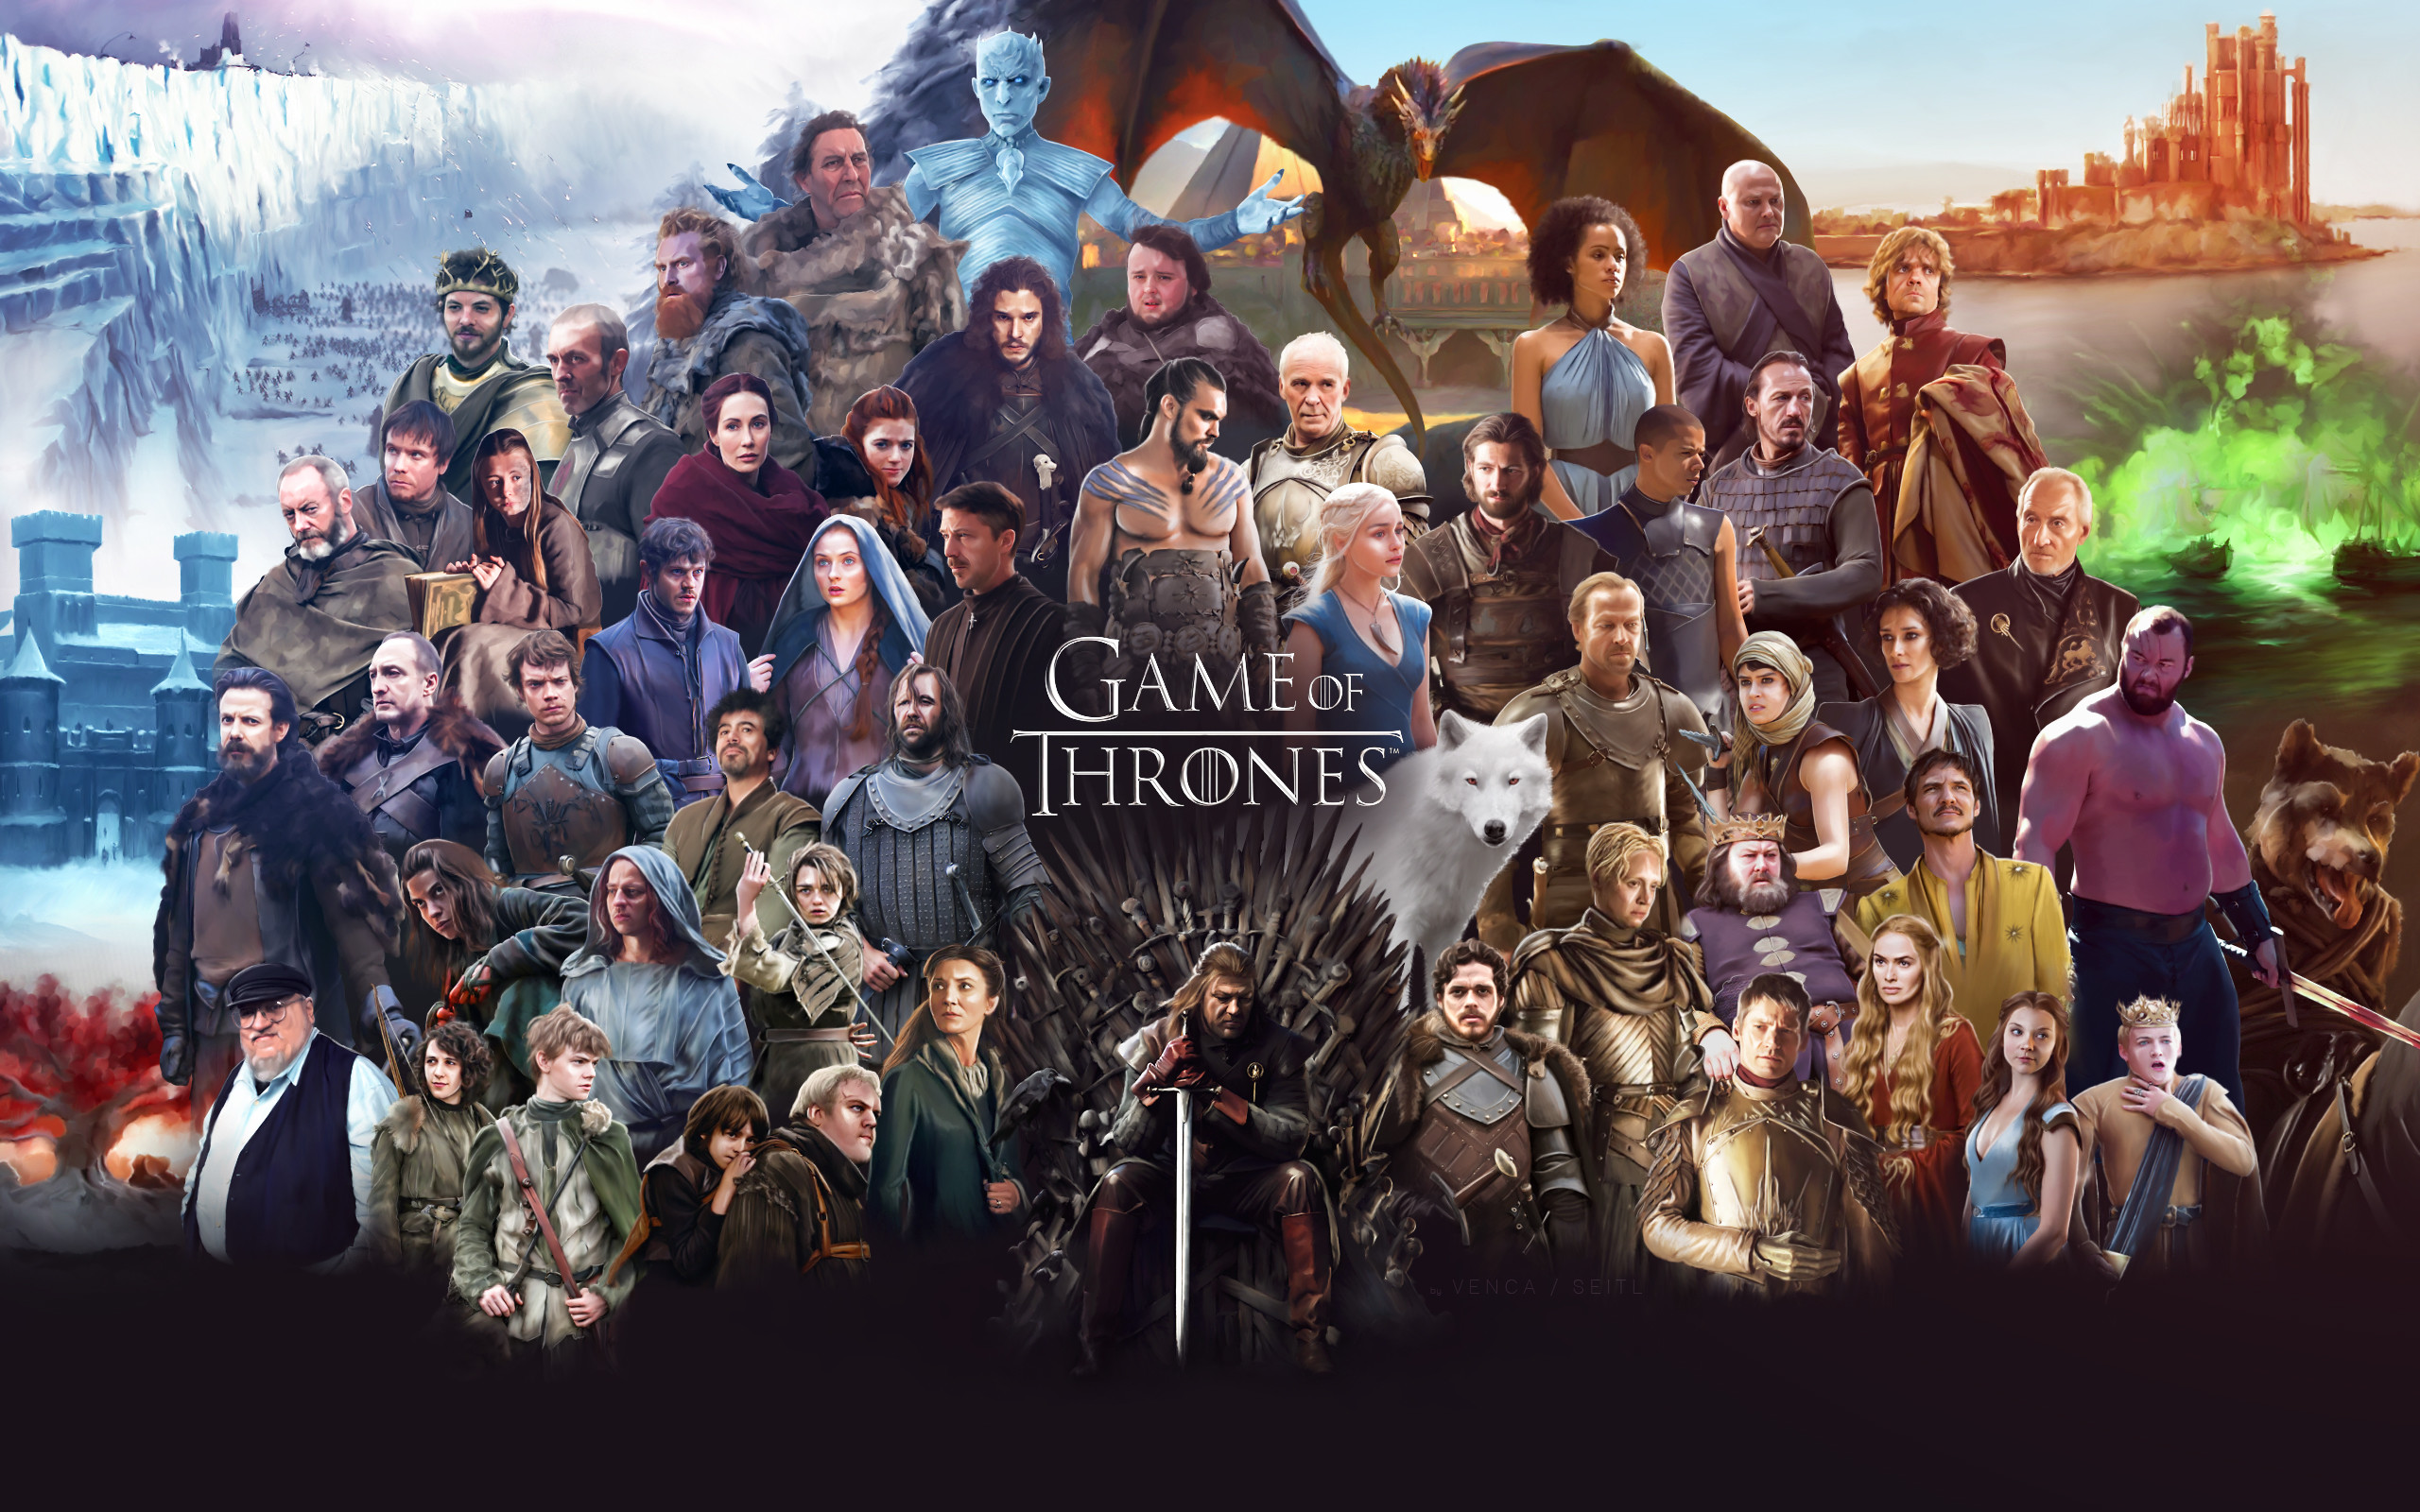 Game of Thrones Wallpaper background picture